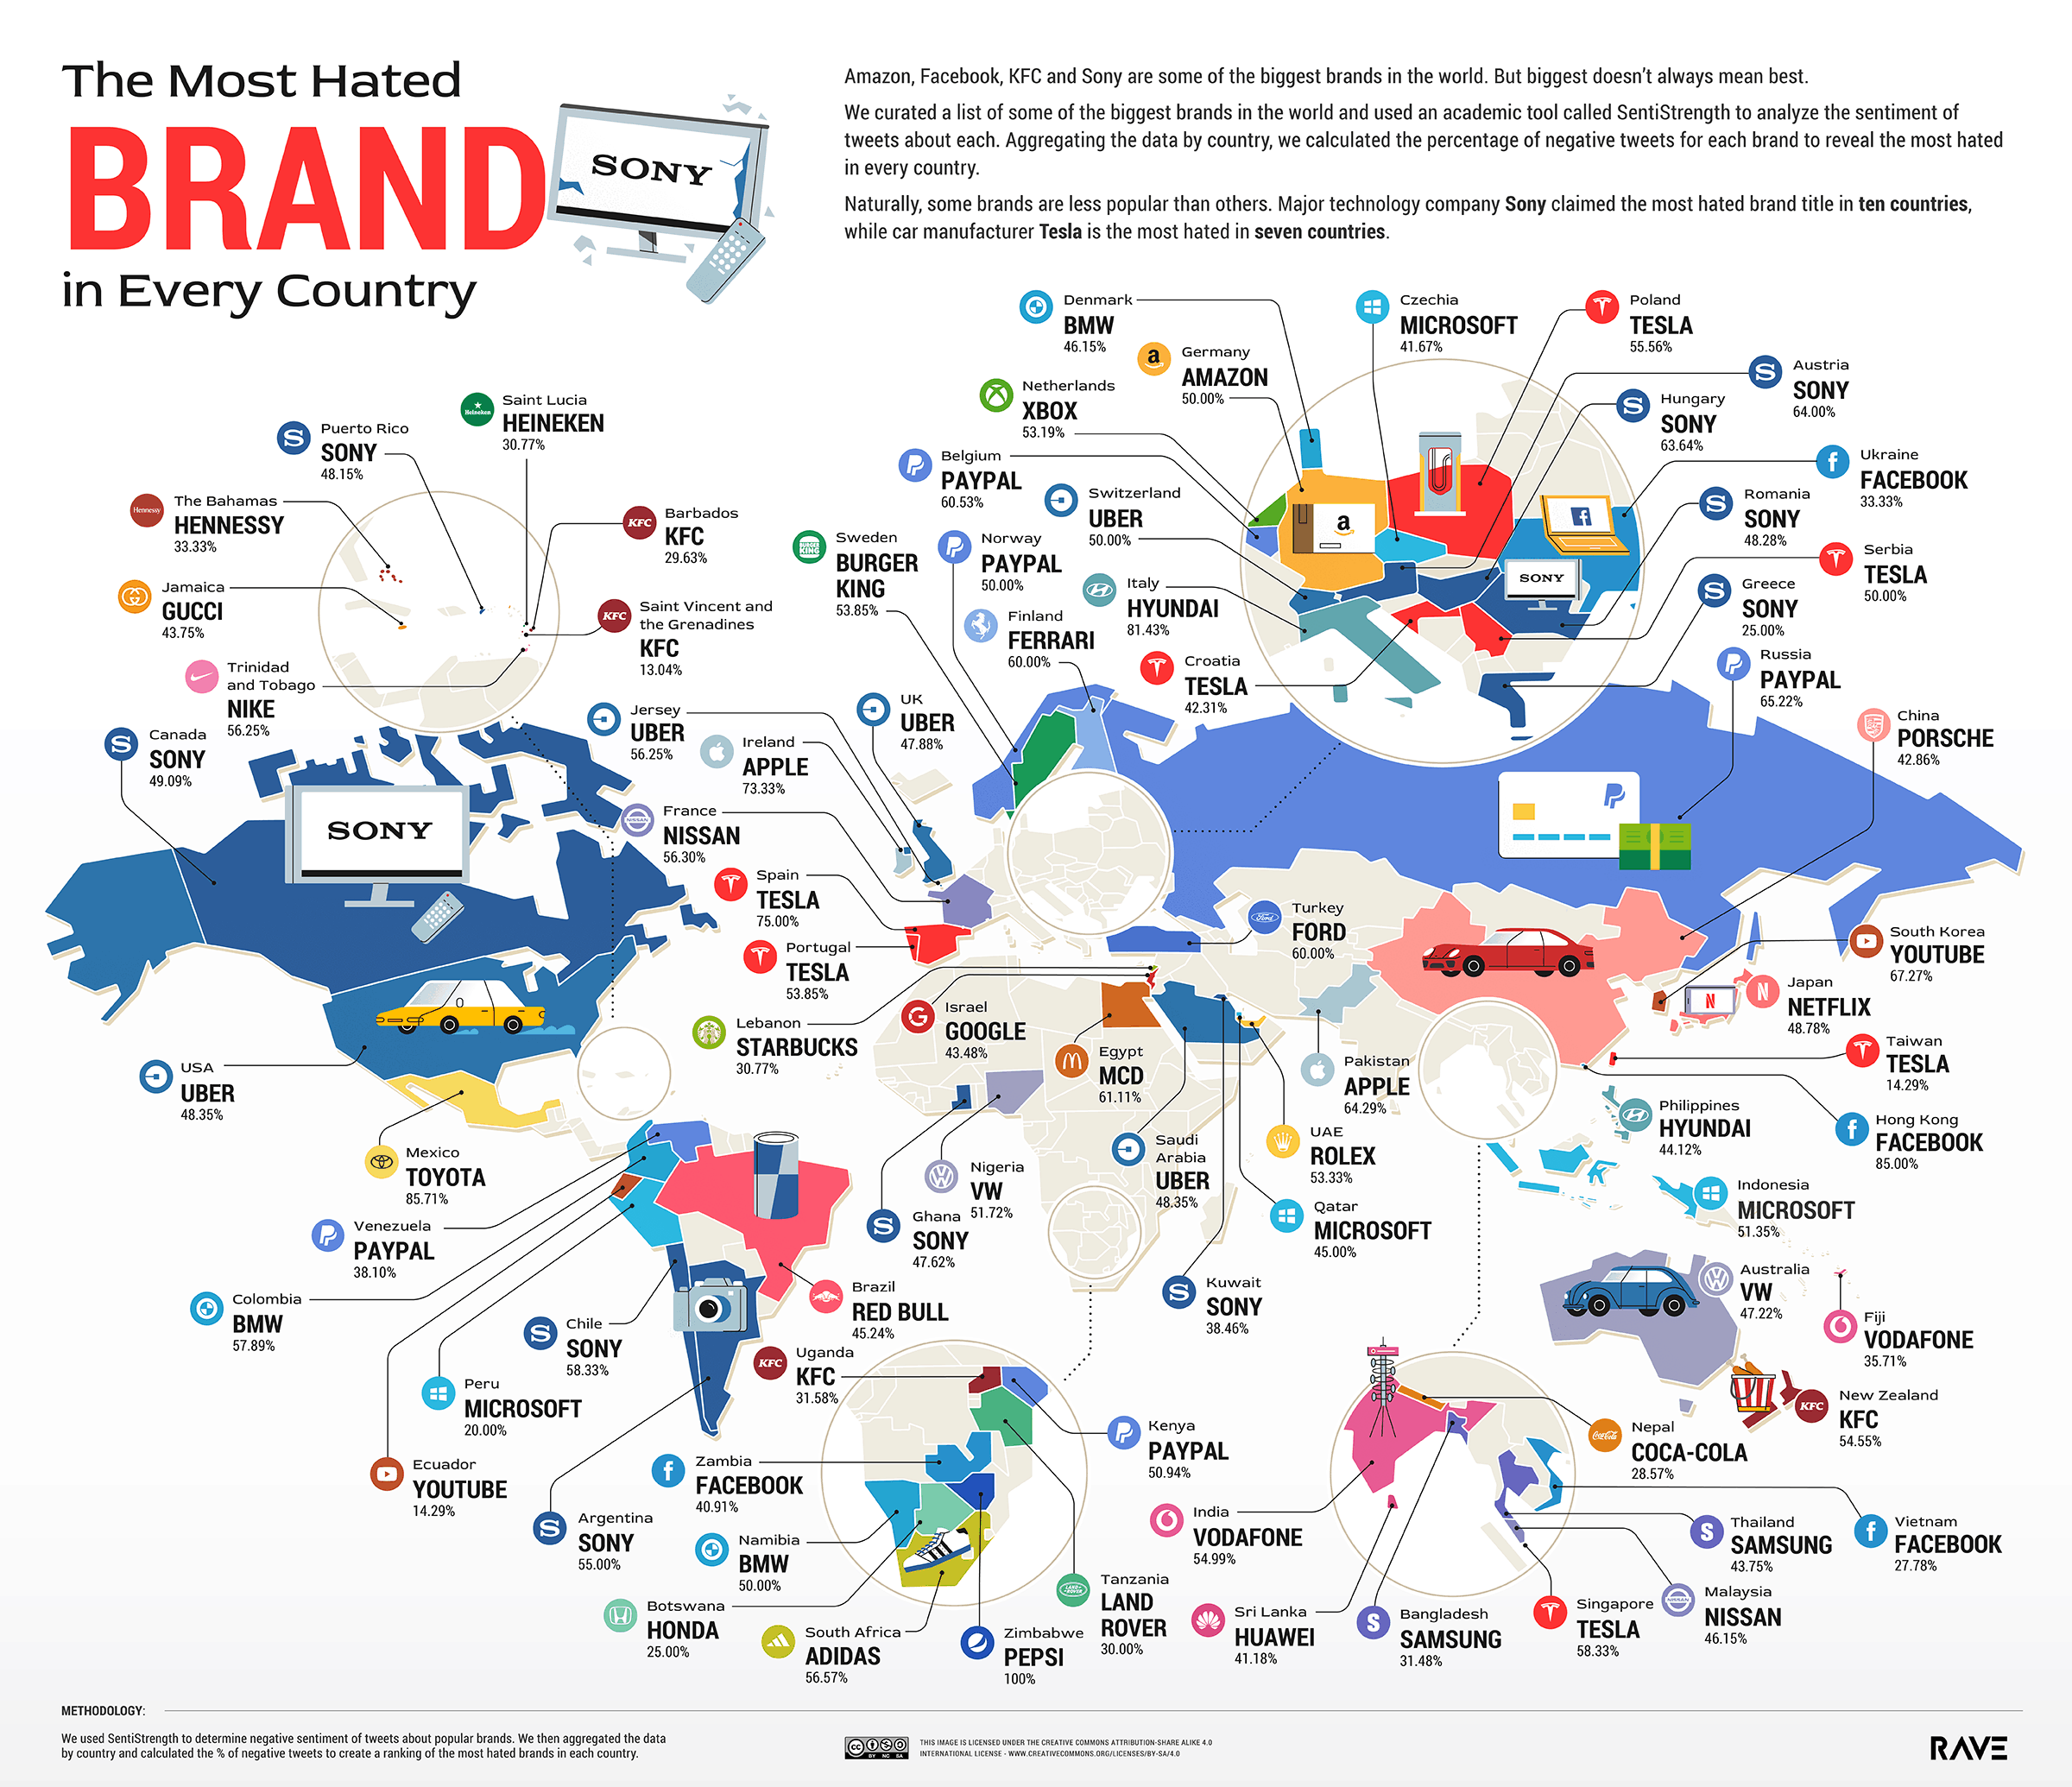 Netflix Top 10 - By Country: Japan